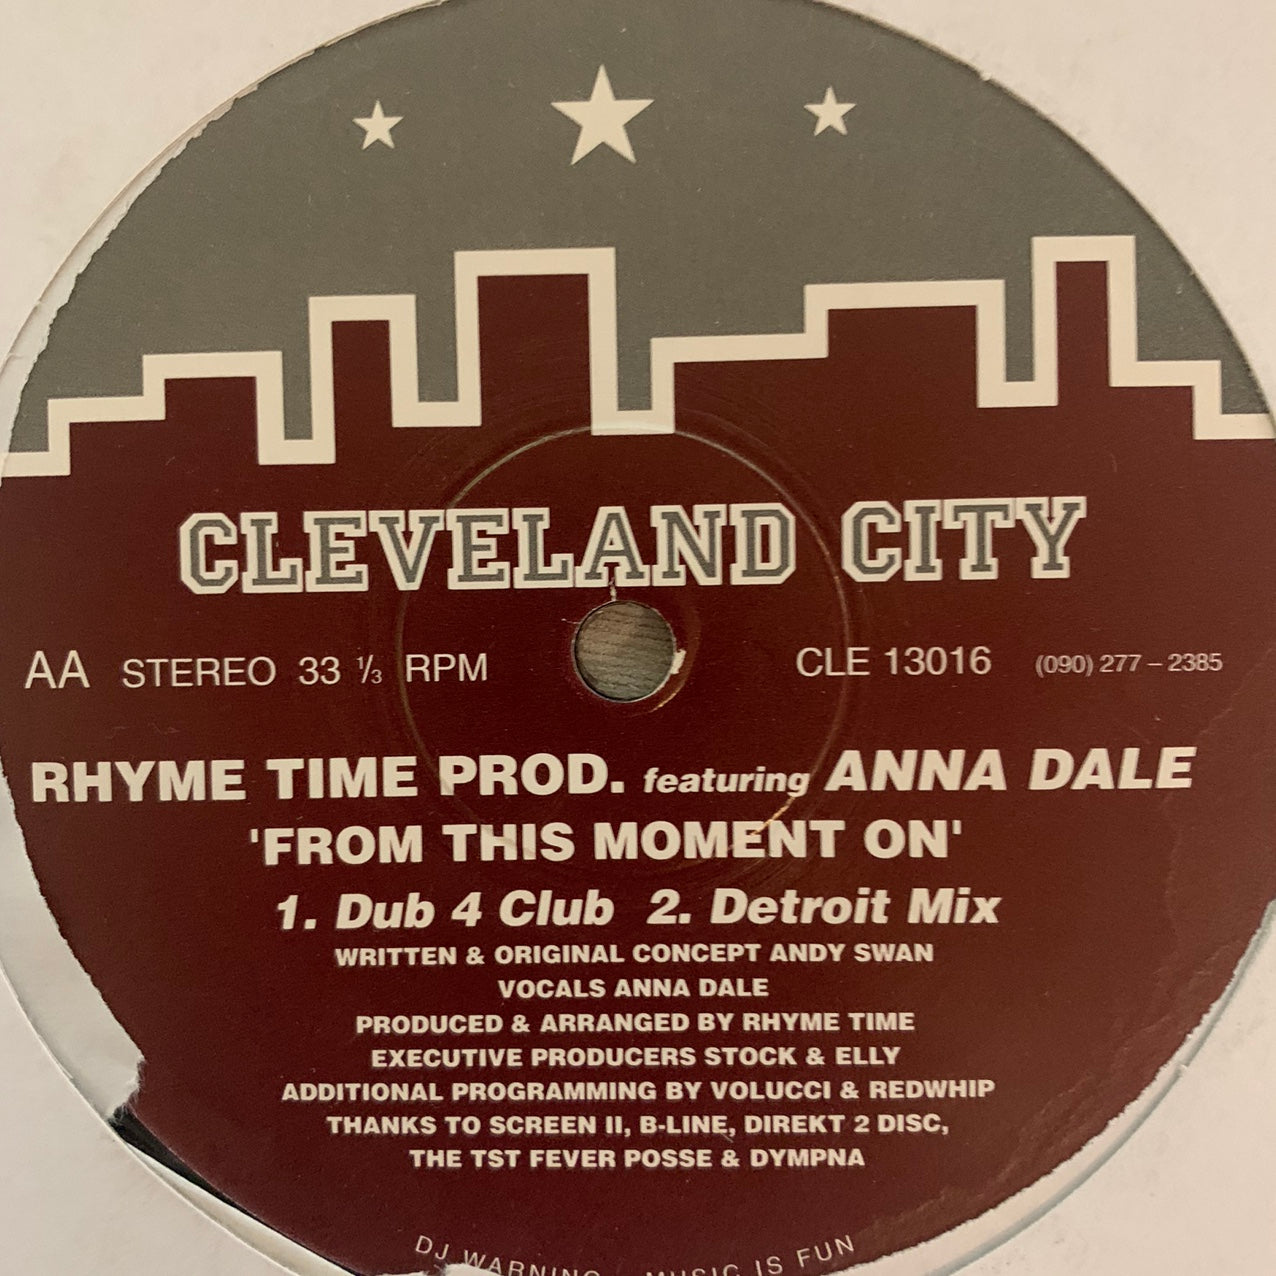 Rhyme Time Prod Feat Anna Dale “From This Moment On” on the iconic House Music Label Cleveland City 3 Track 12inch Vinyl